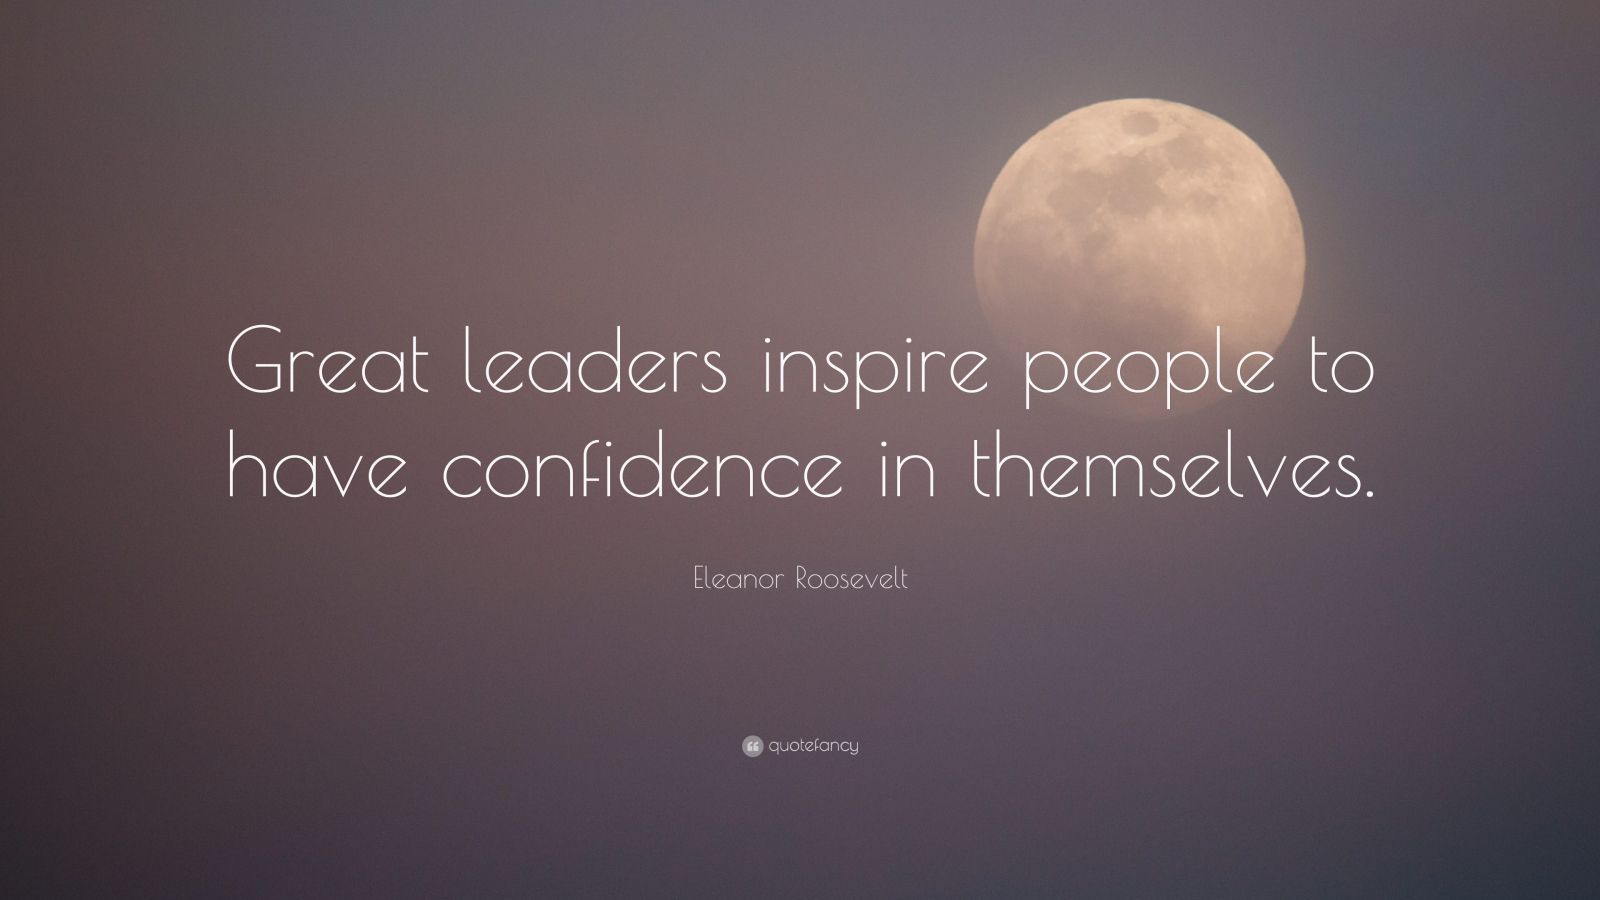 Eleanor Roosevelt Quote: “Great leaders inspire people to have